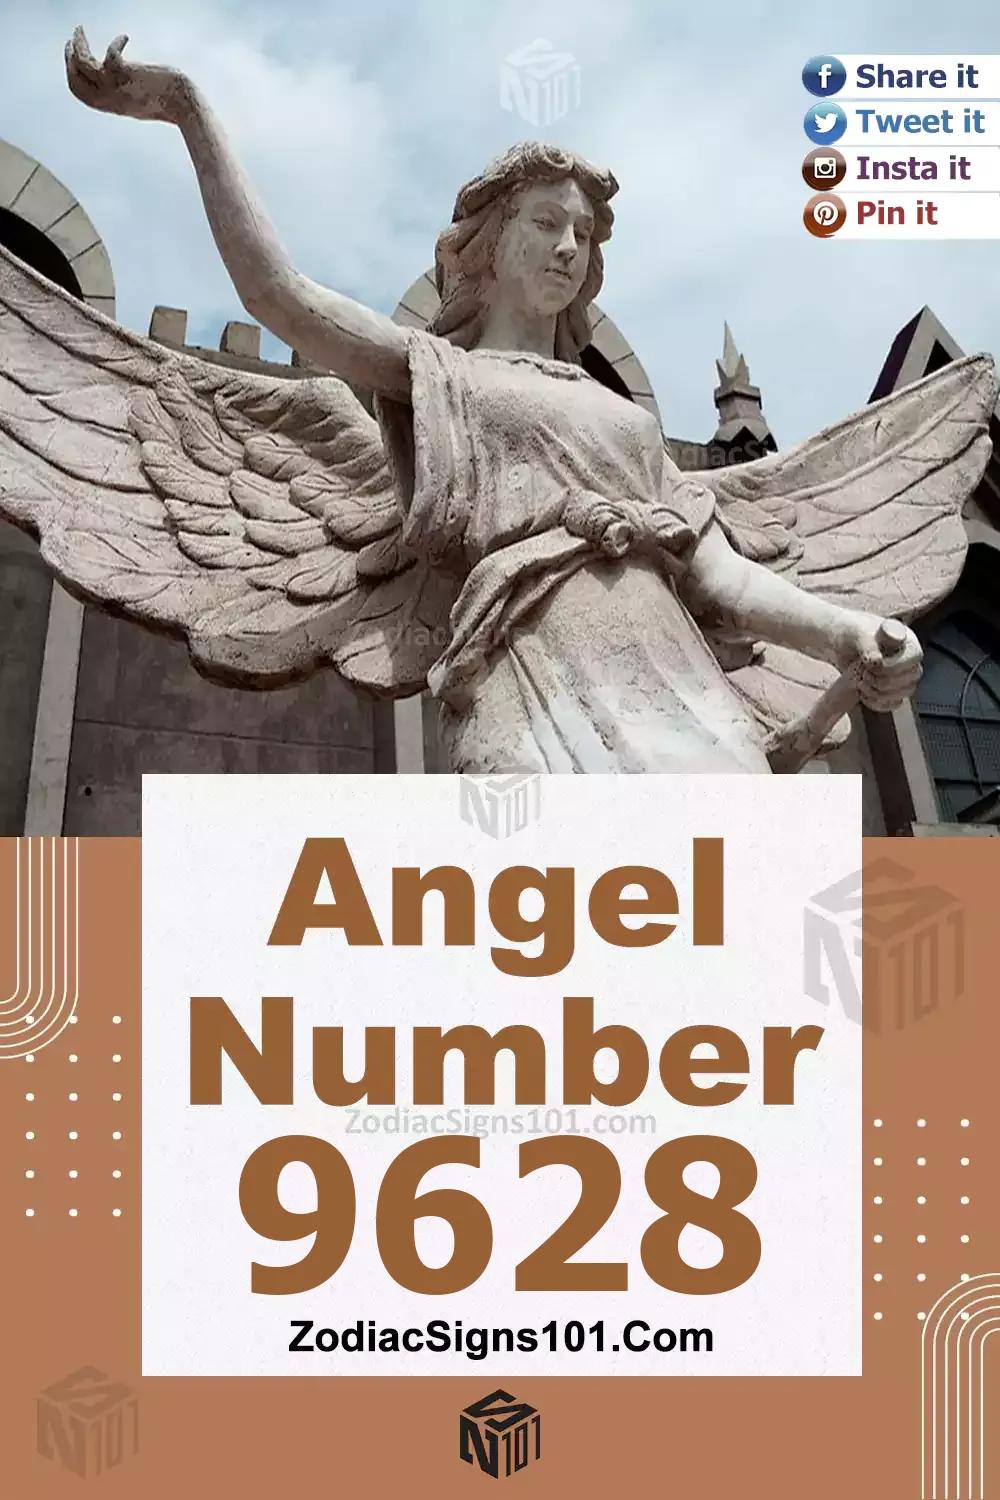 9628 Angel Number Meaning